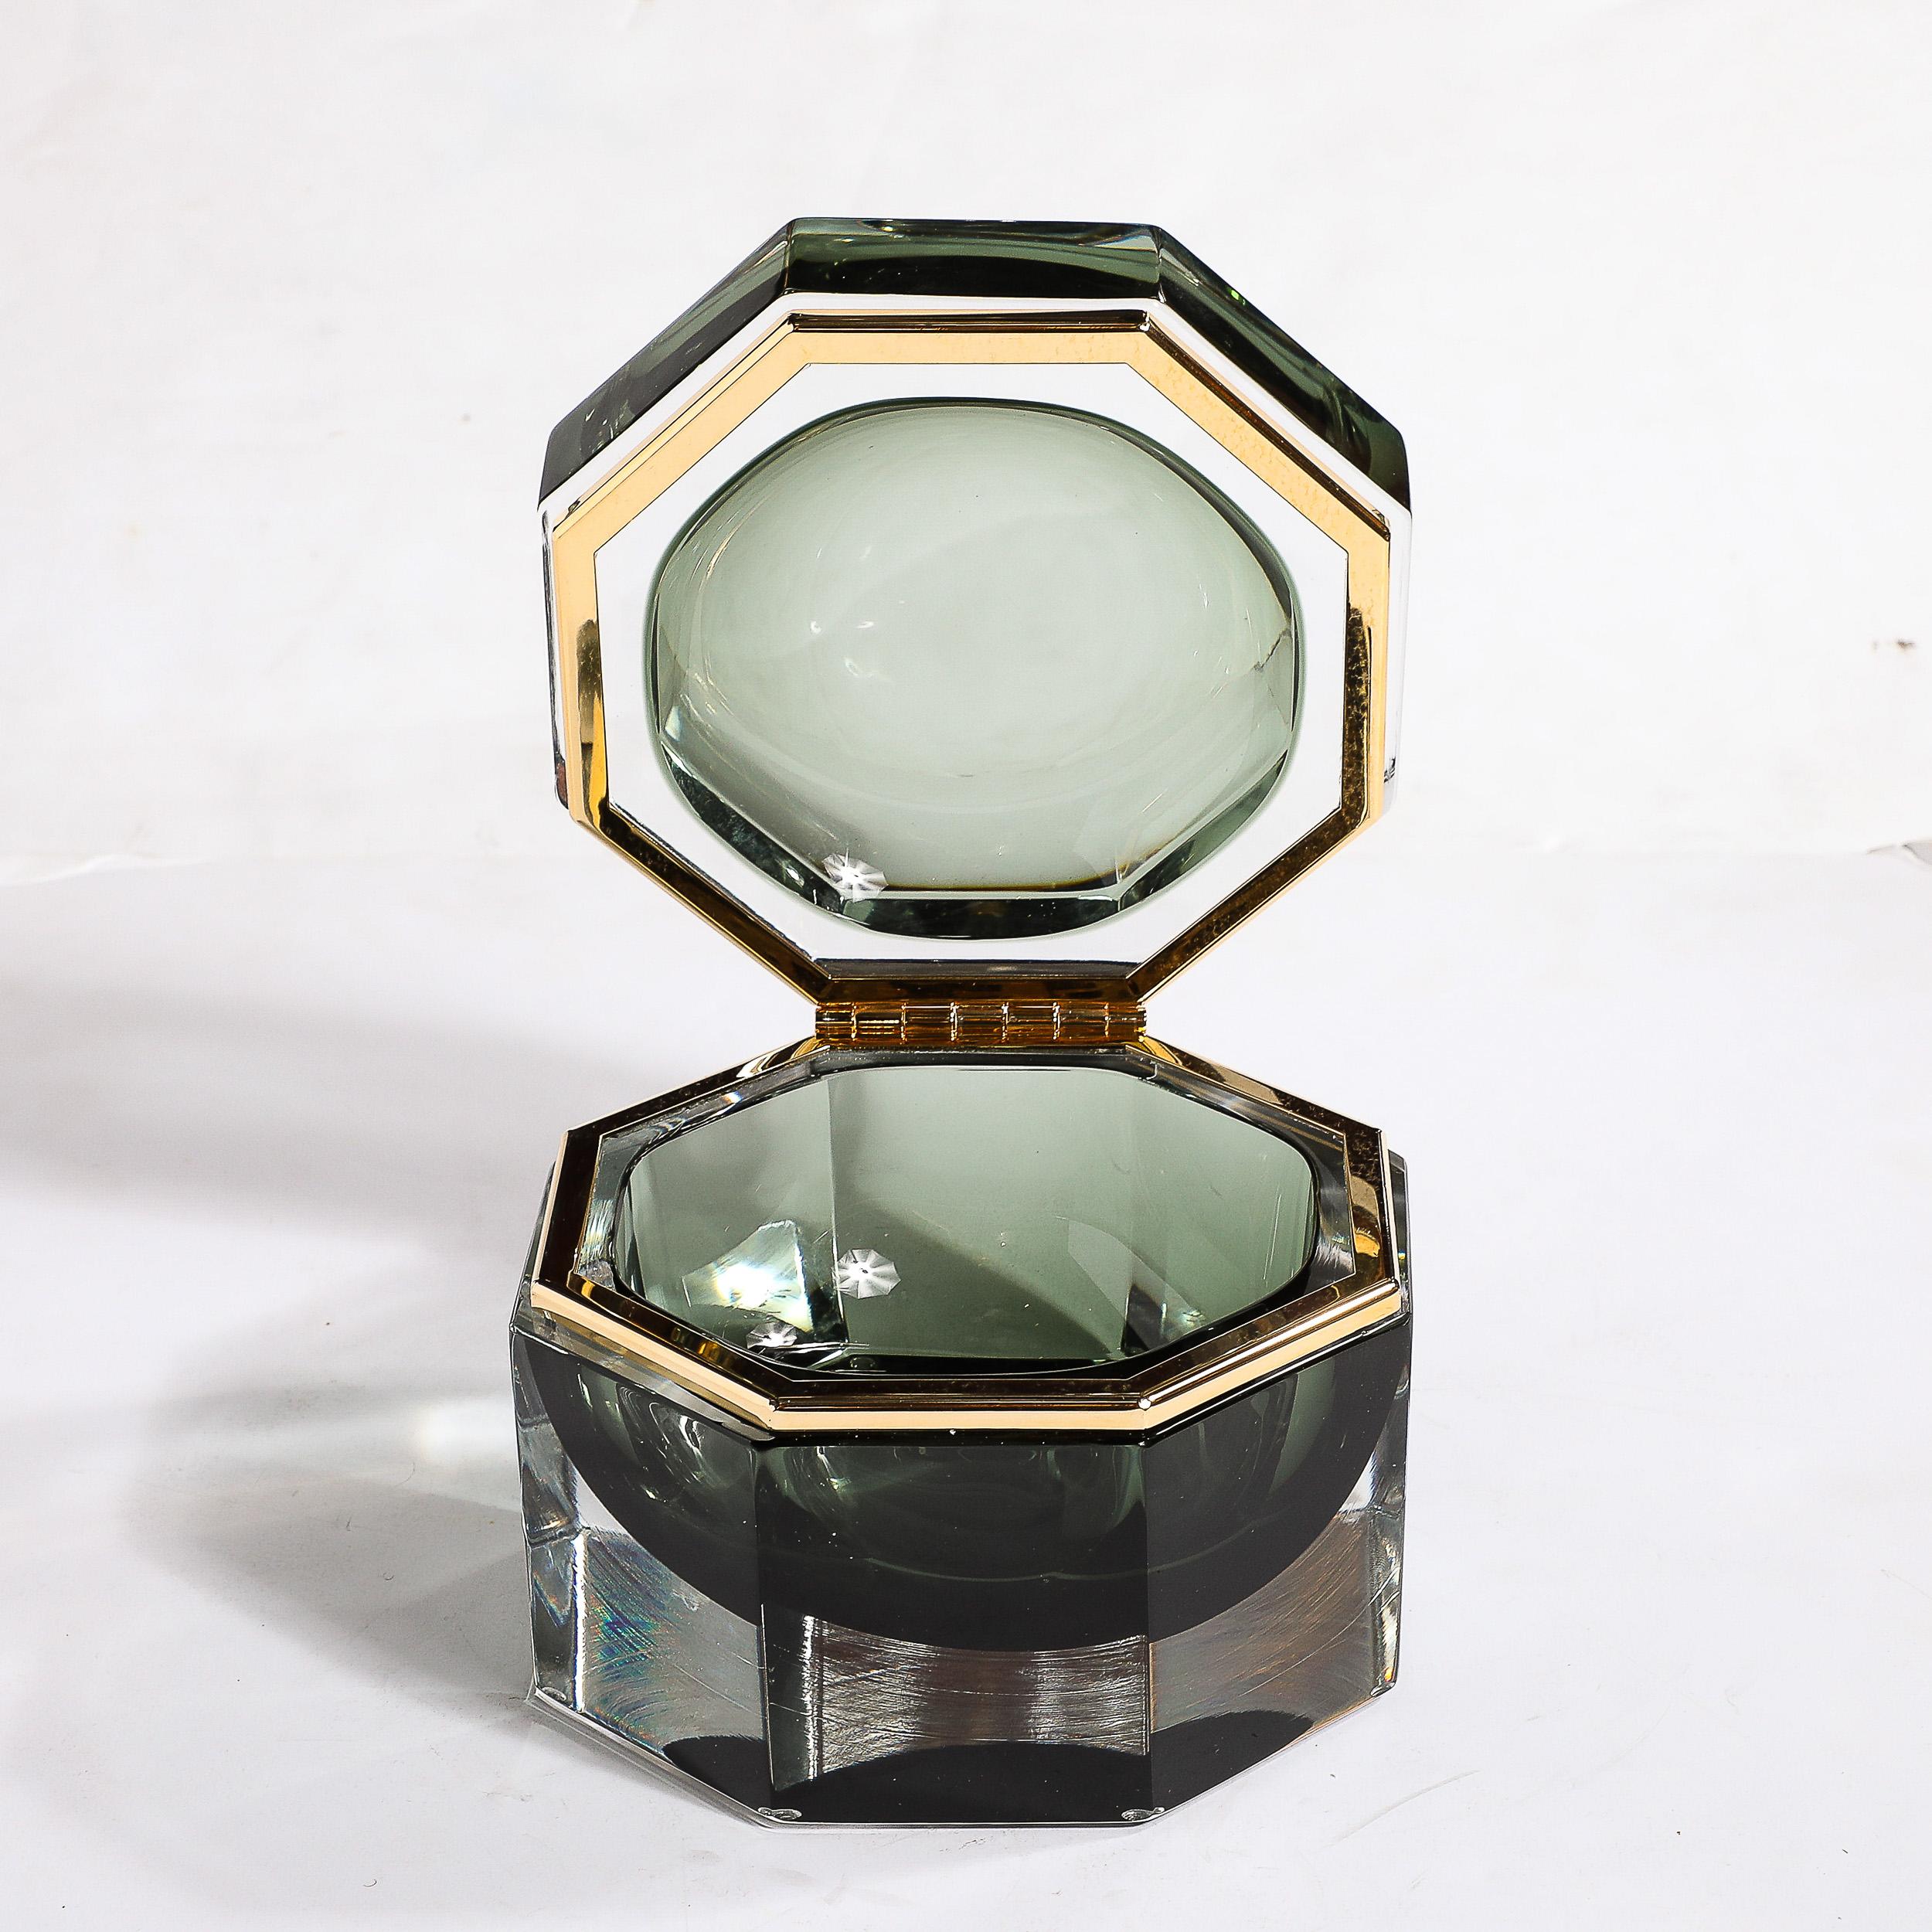 Contemporary Modernist Hand-Blown Murano Octagonal Glass Box in Emerald w/ Brass Fittings For Sale